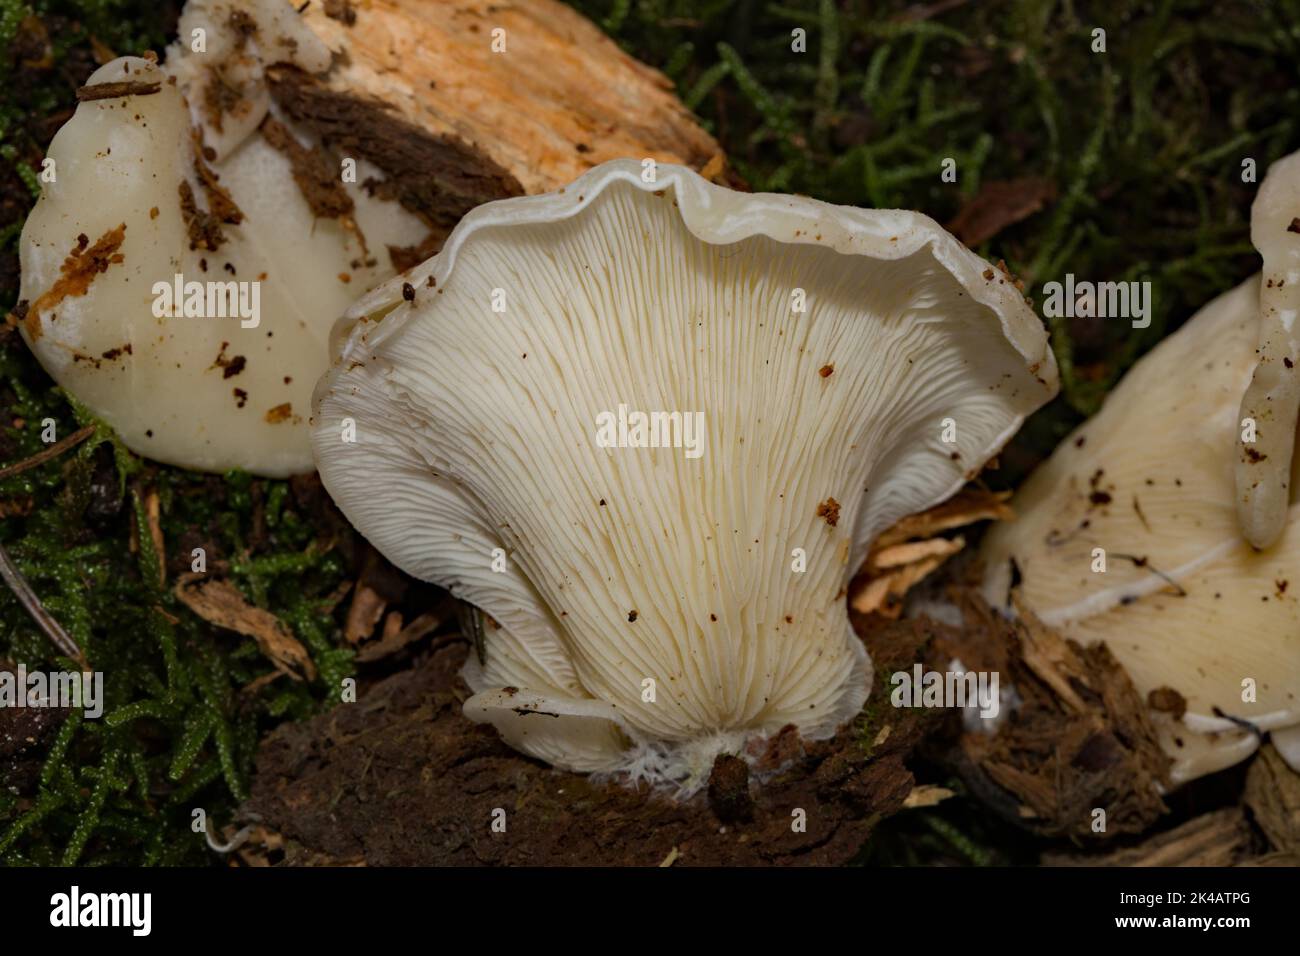 Ear-shaped white mushroom Fruiting body with white stalk and cap Stock Photo